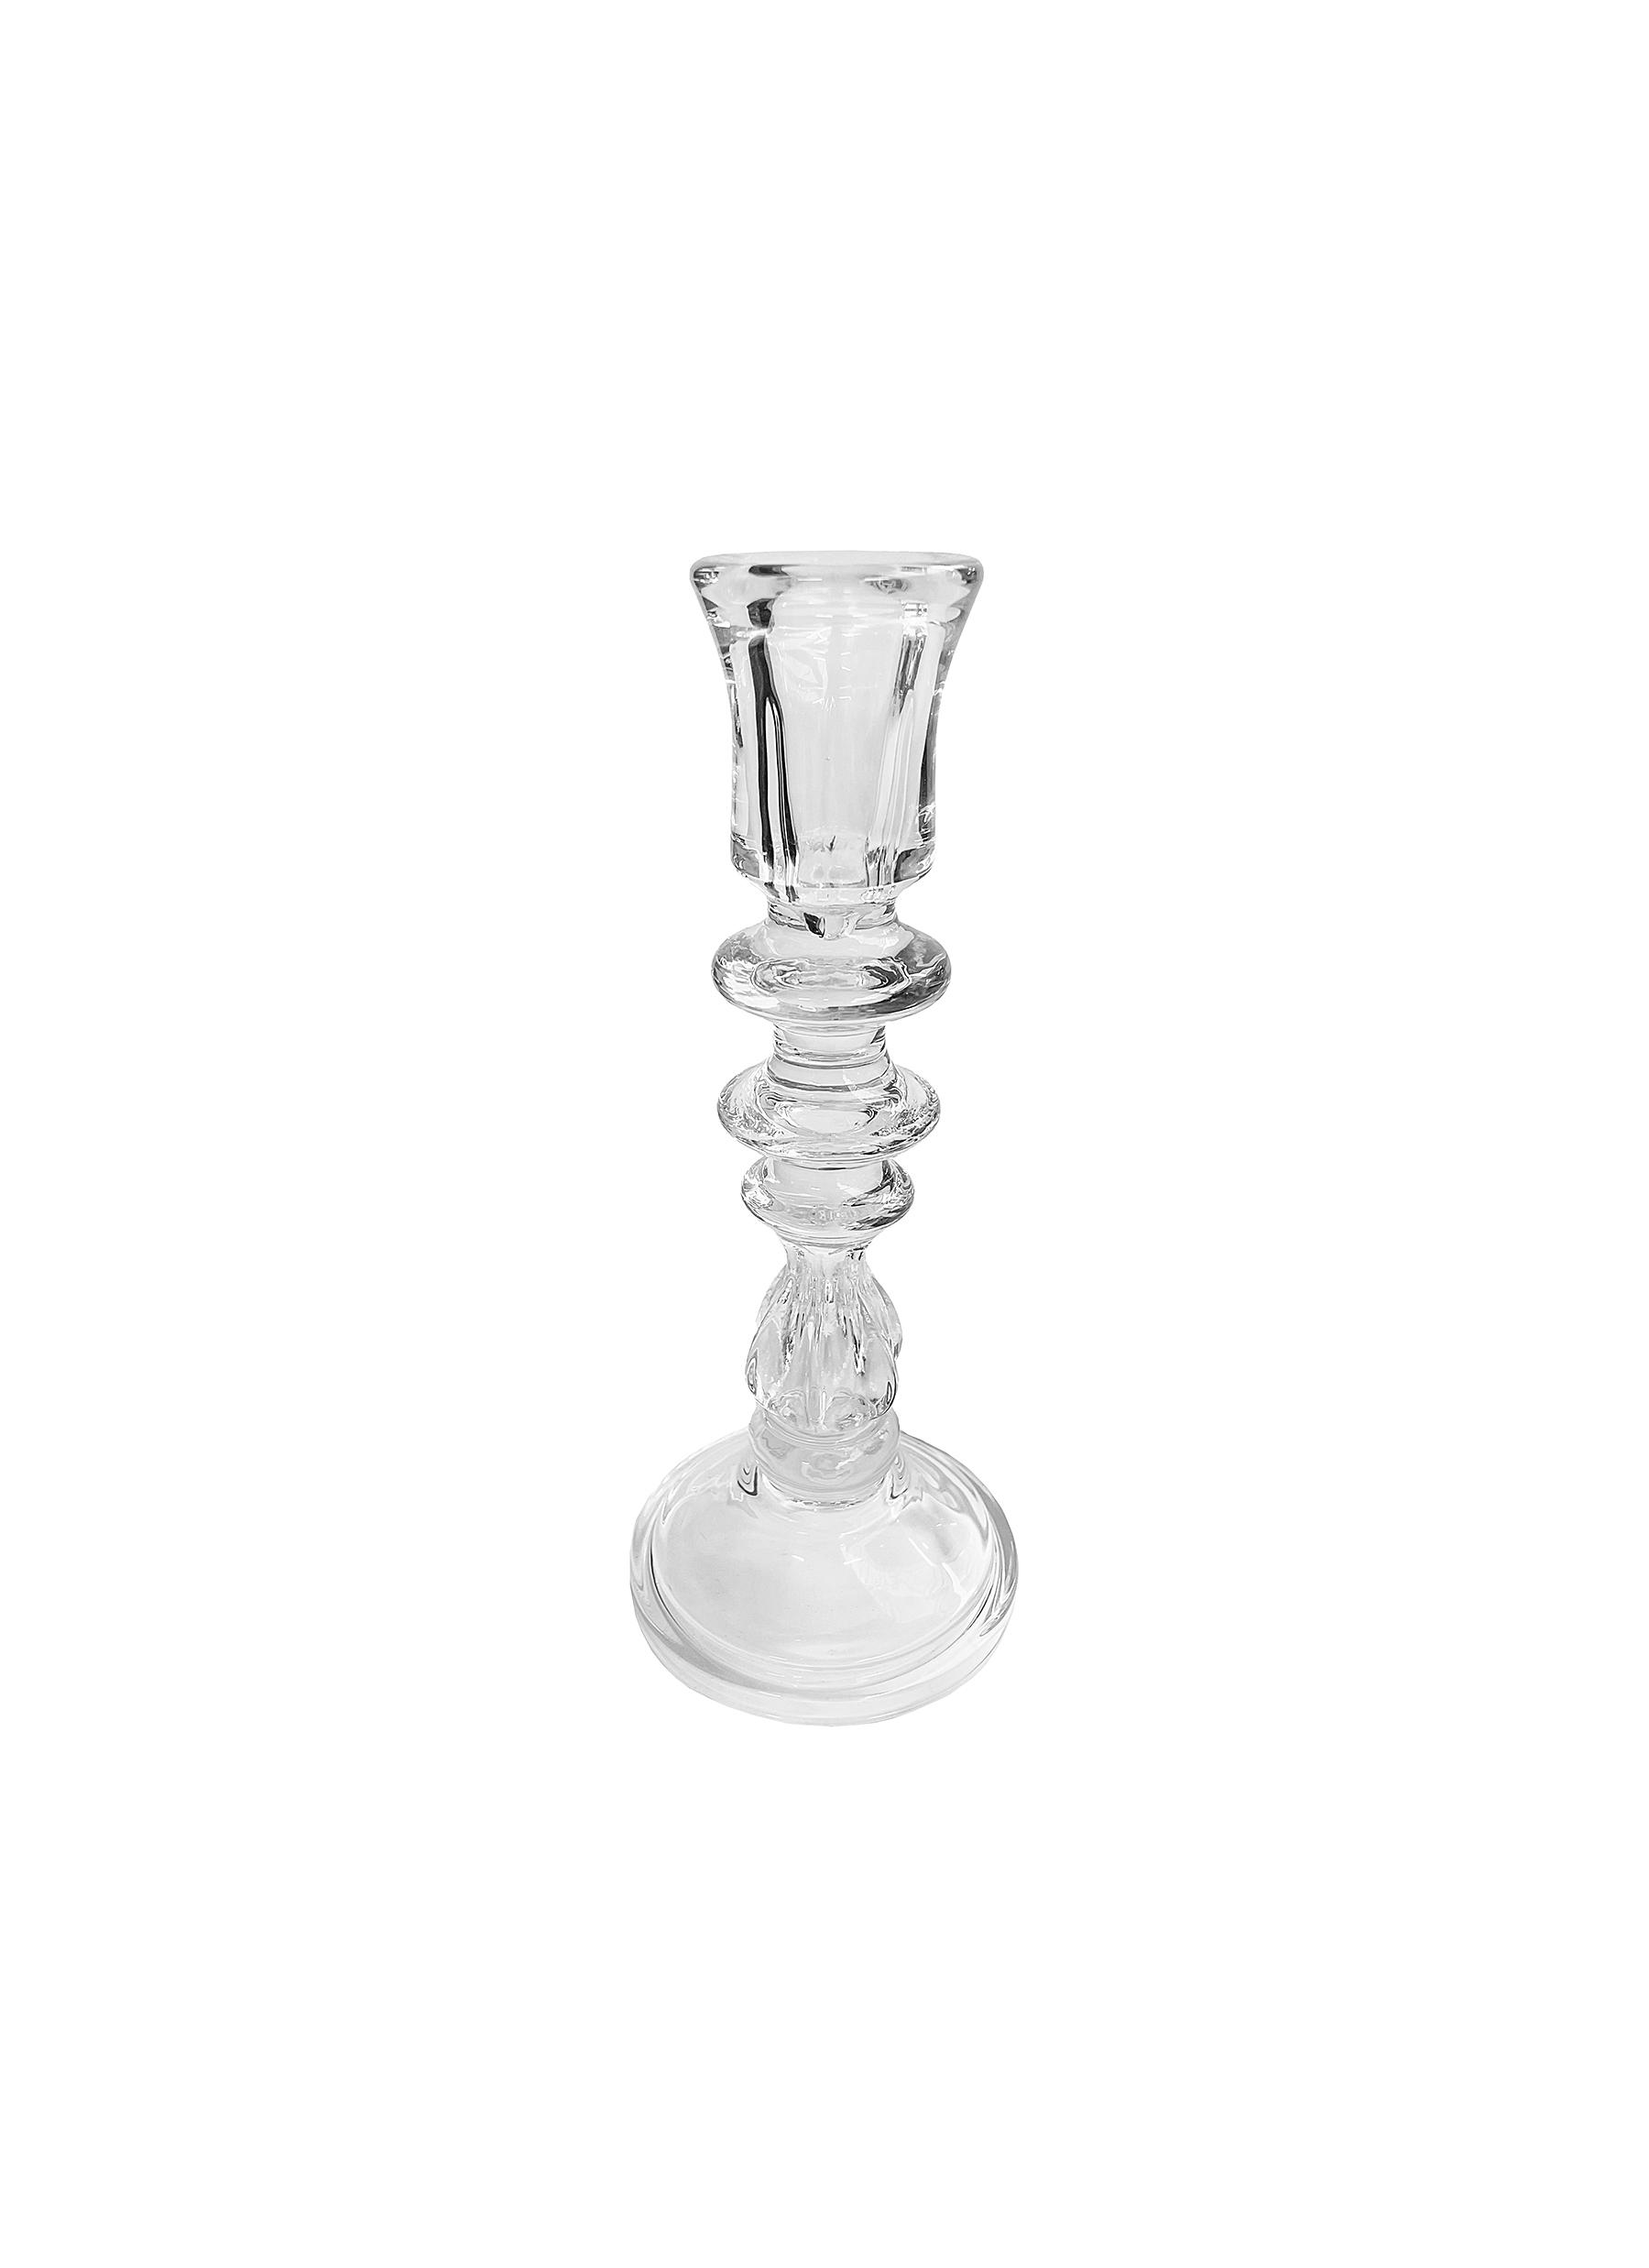 GLASS CANDLE HOLDER - CLEAR